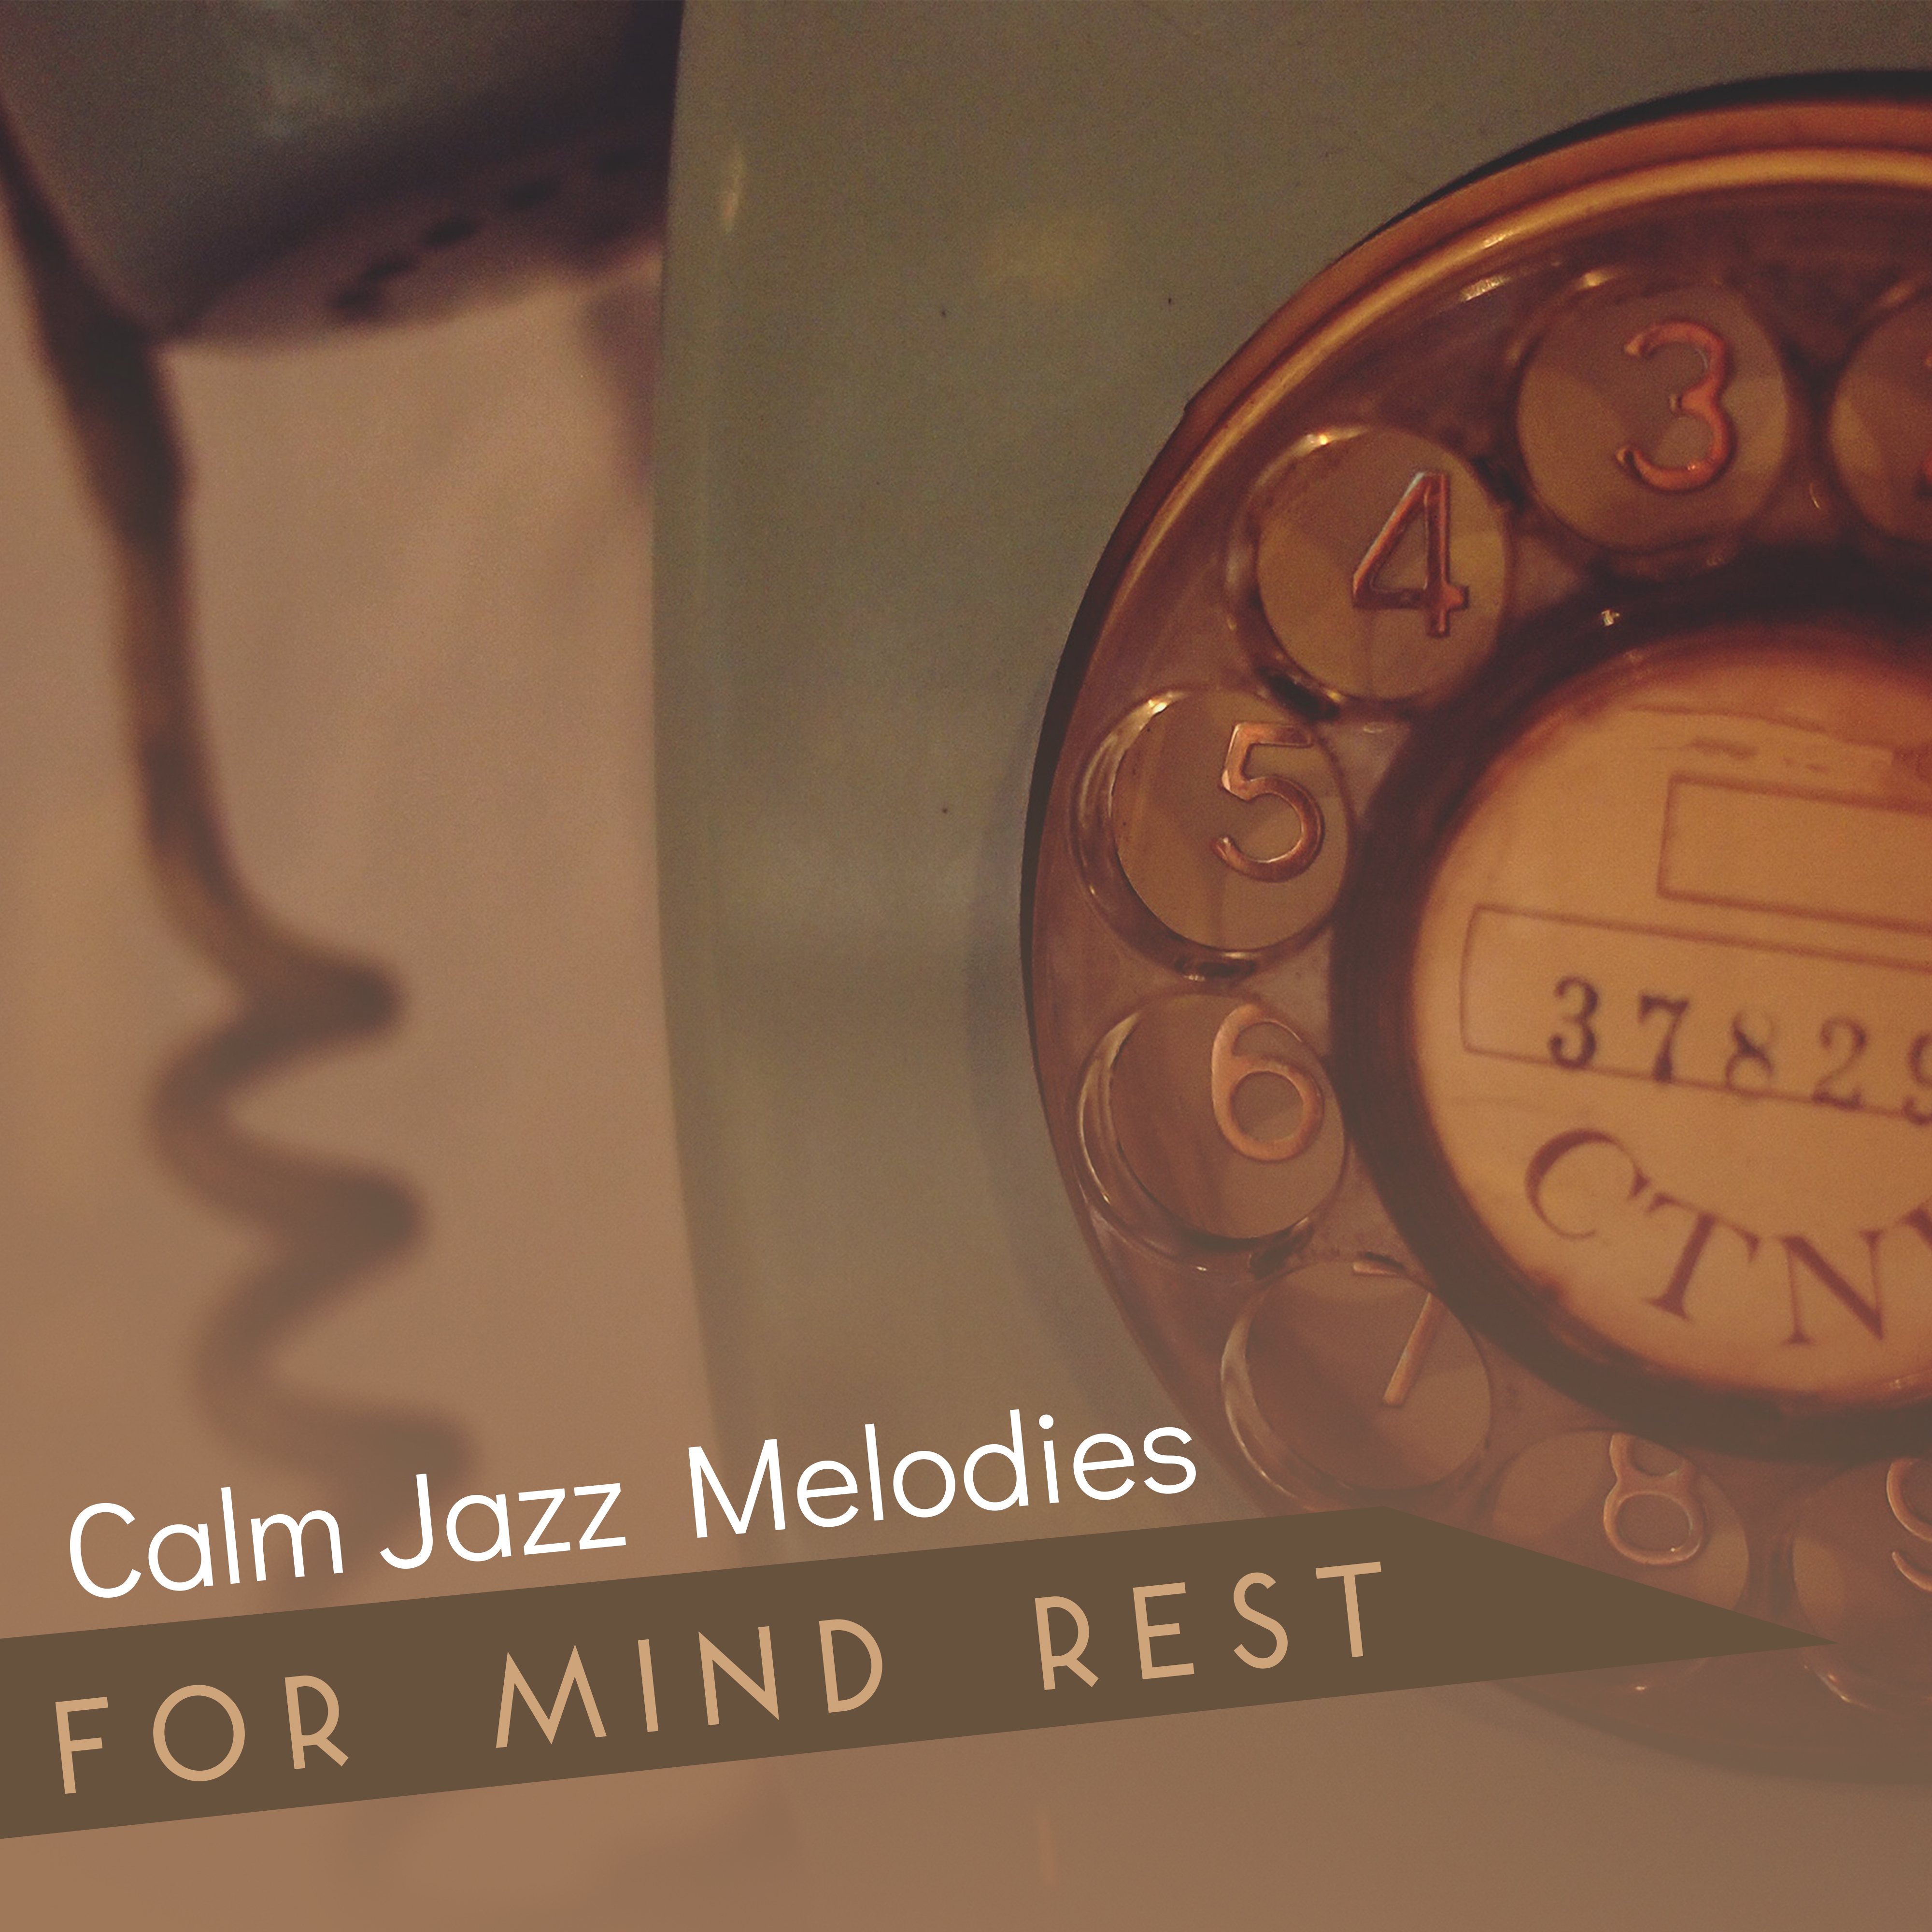 Calm Jazz Melodies for Mind Rest  Relaxing Jazz Sounds, Instrumental Melodies, Soothing Music, Shades of Jazz